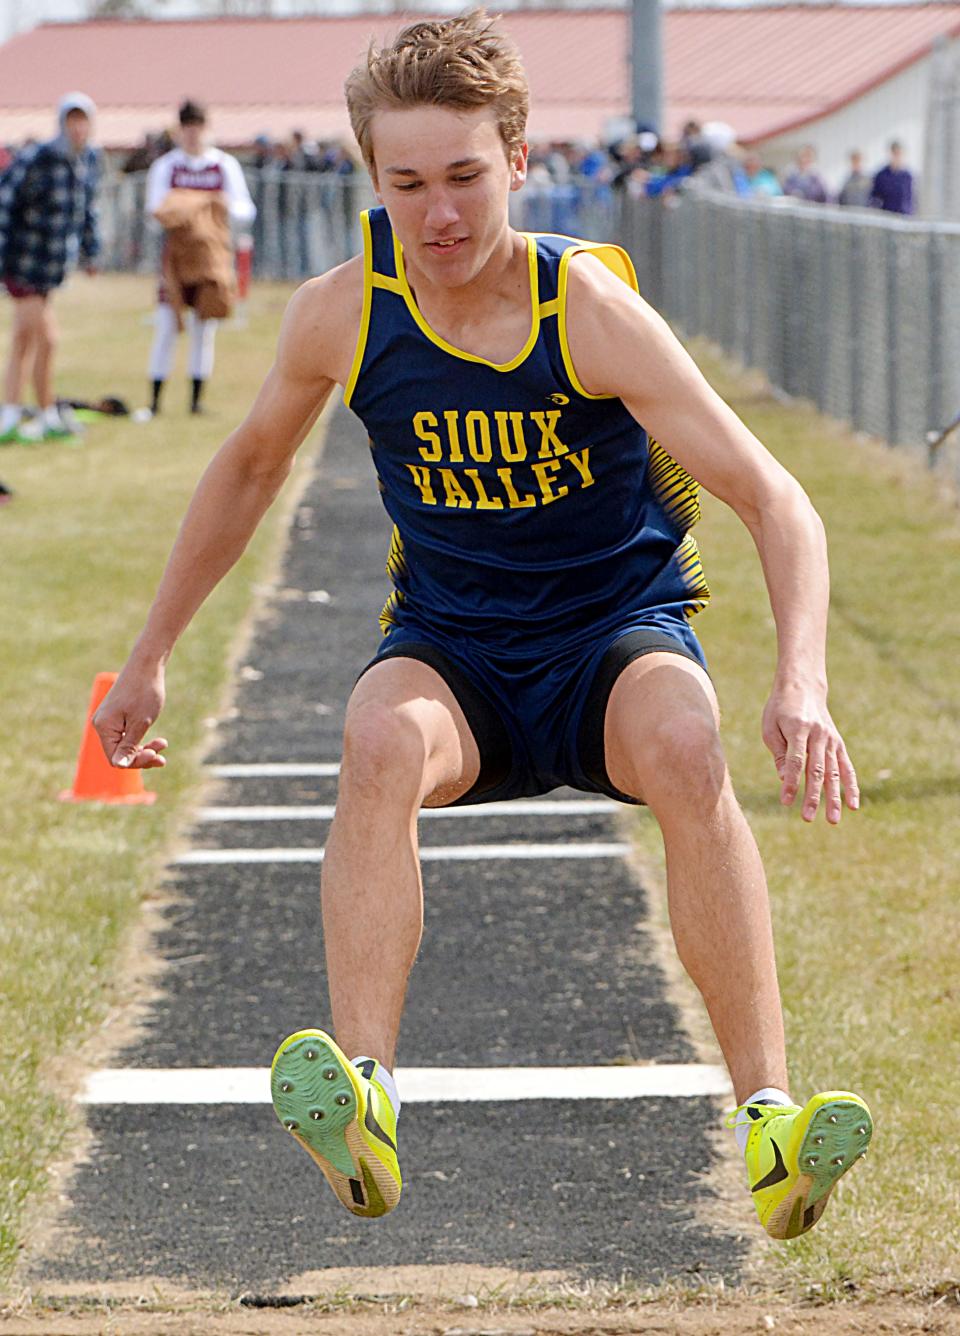 Braden Danzeisen of Sioux Valley gets ready to land in the boys' triple jump during the Pat Gilligan Alumni track and field meet on Tuesday, April 25, 2023 in Estelline.